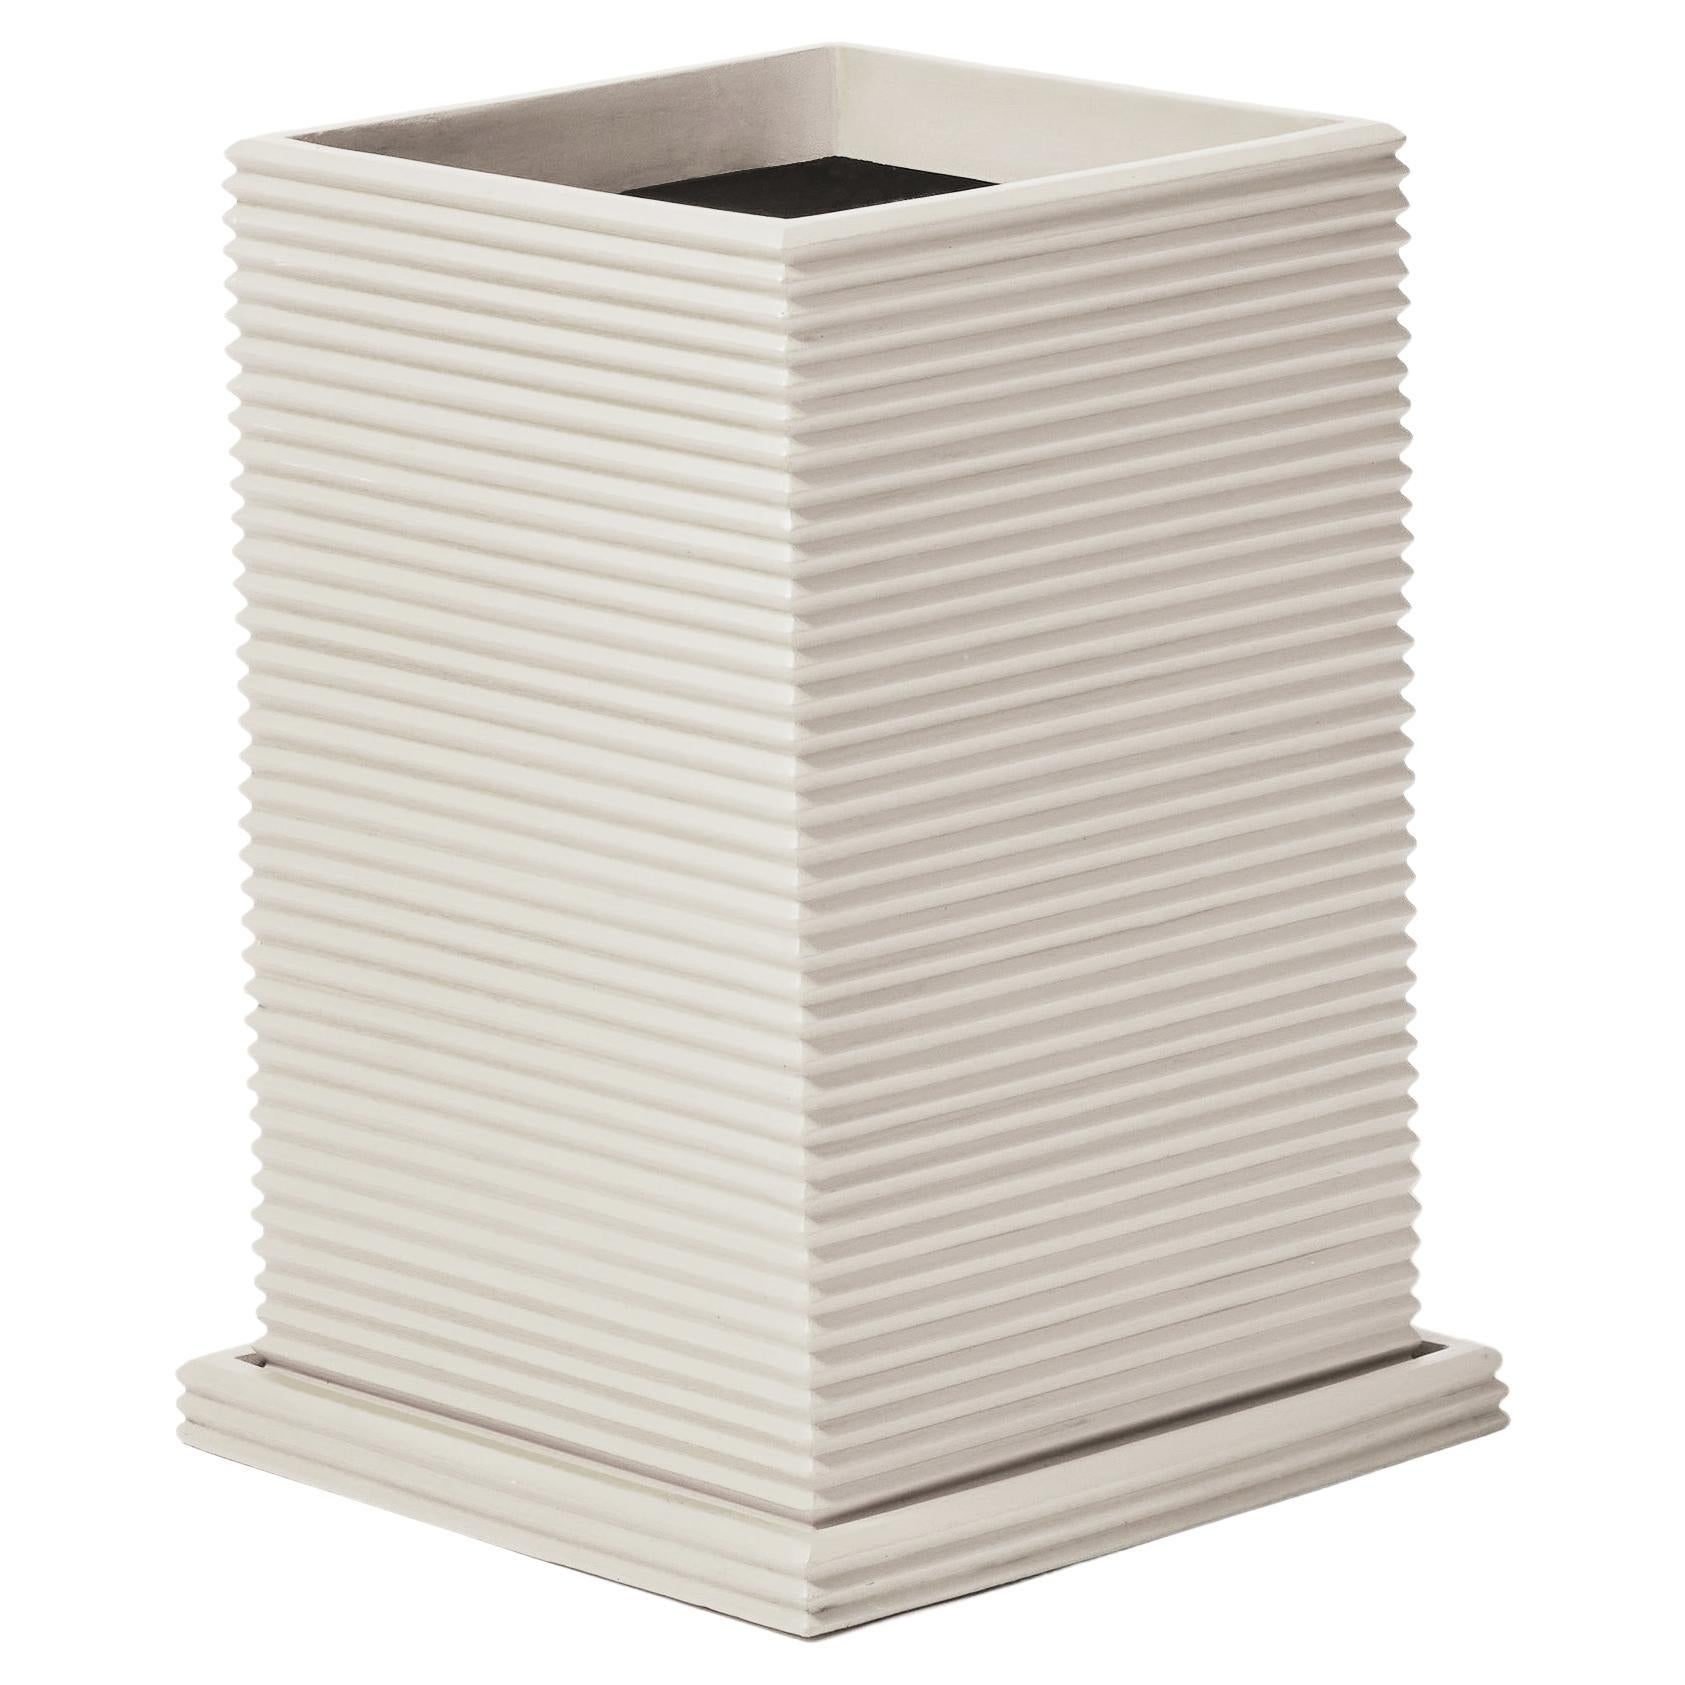 Standard Tall Rectangular Planter 'Ivory' by TFM, Represented by Tuleste Factory